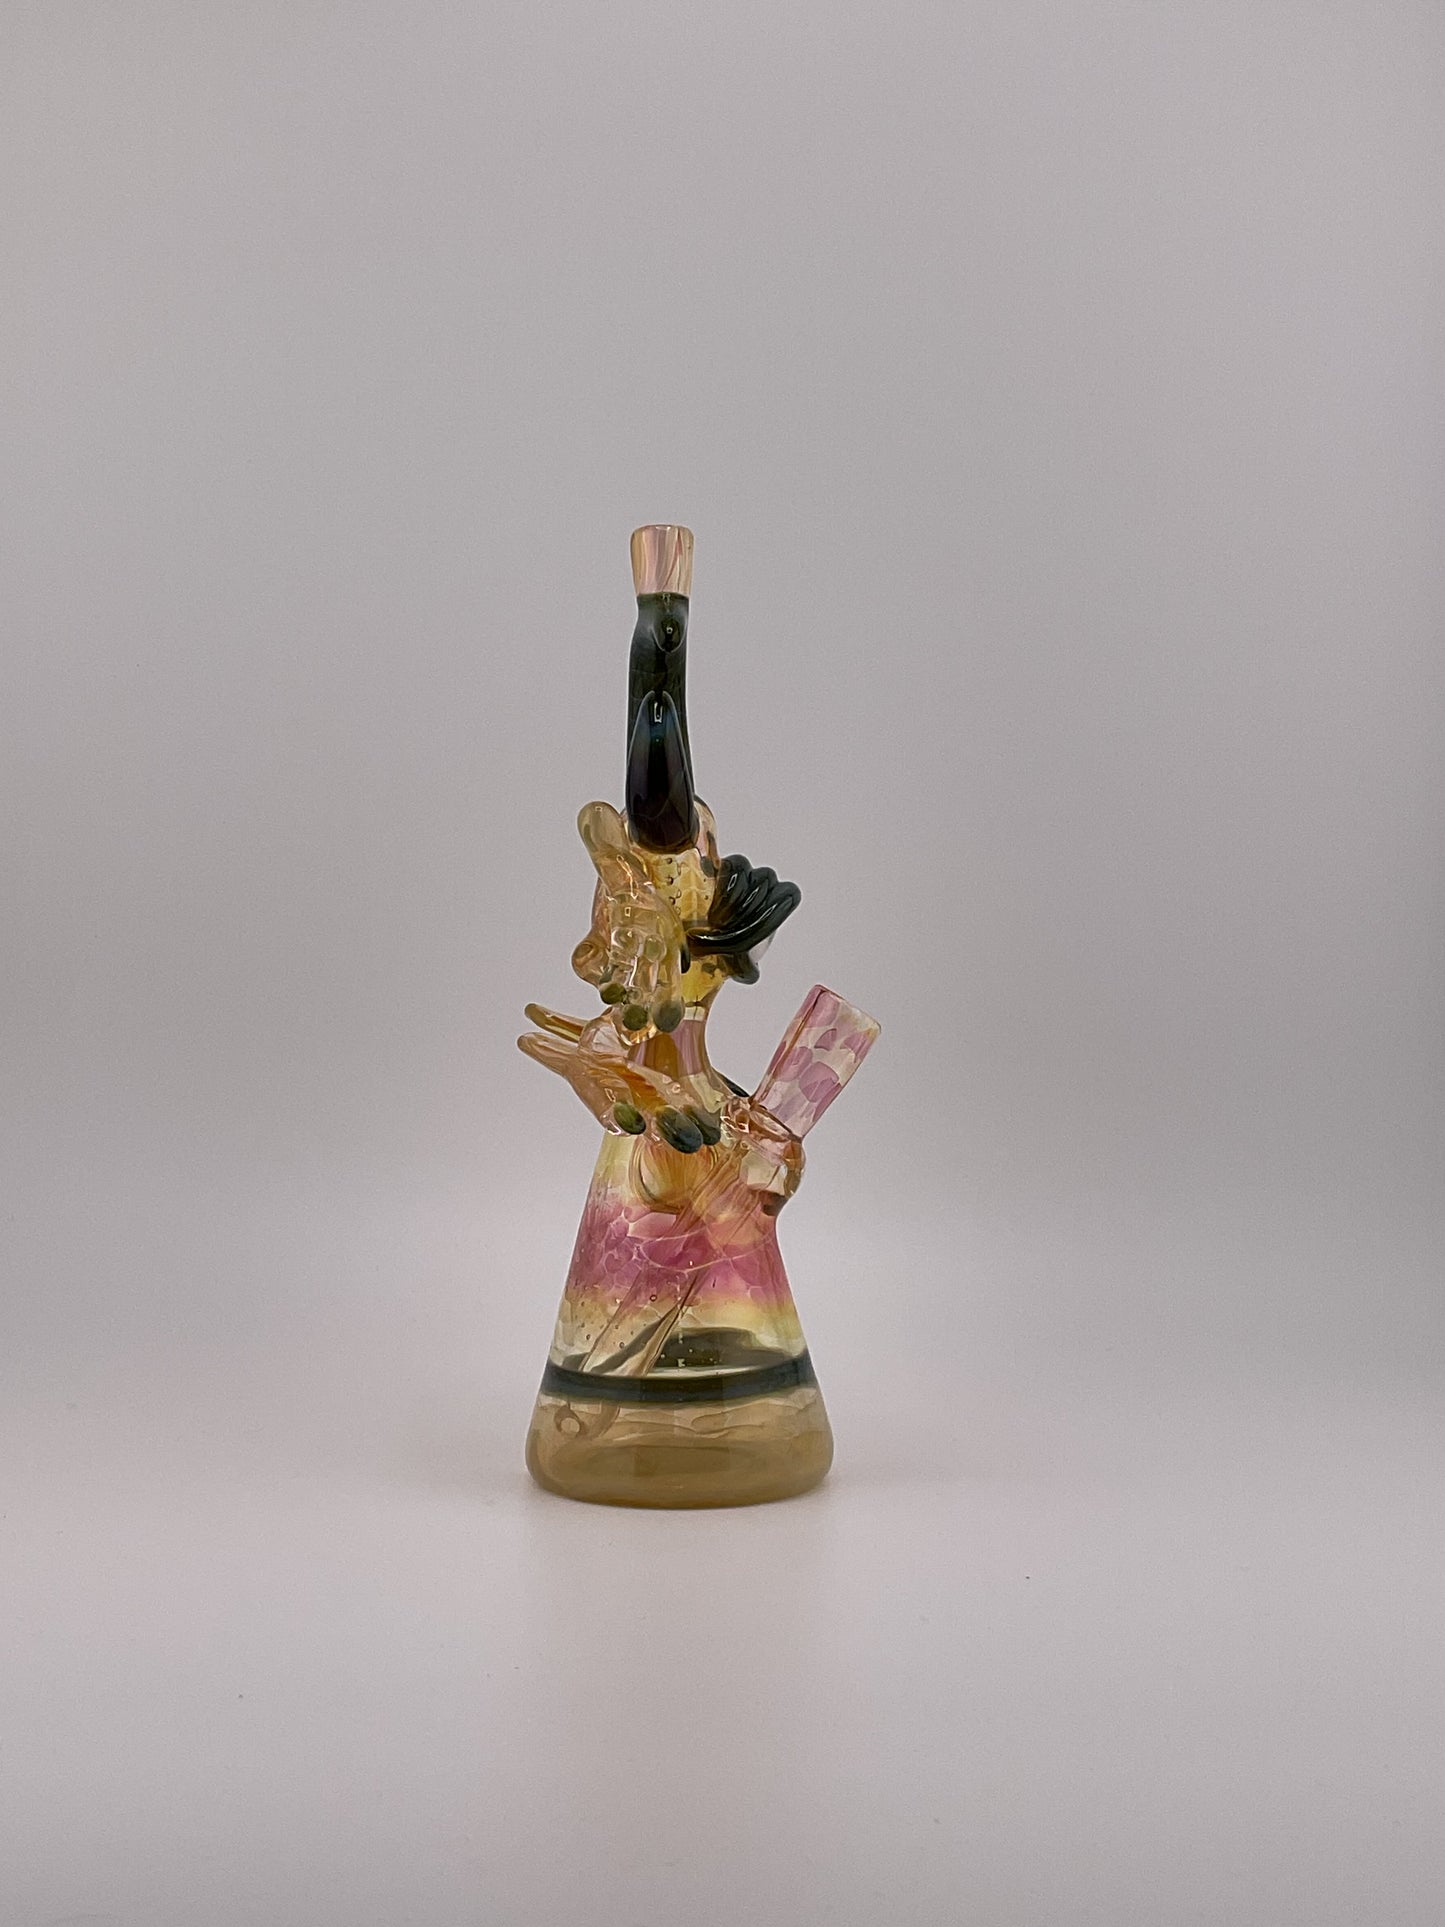 Fumed Jacob jarvis warrior mini tube side view, green horns flower marble pink and yellow hues large eyball with fingernails and toes